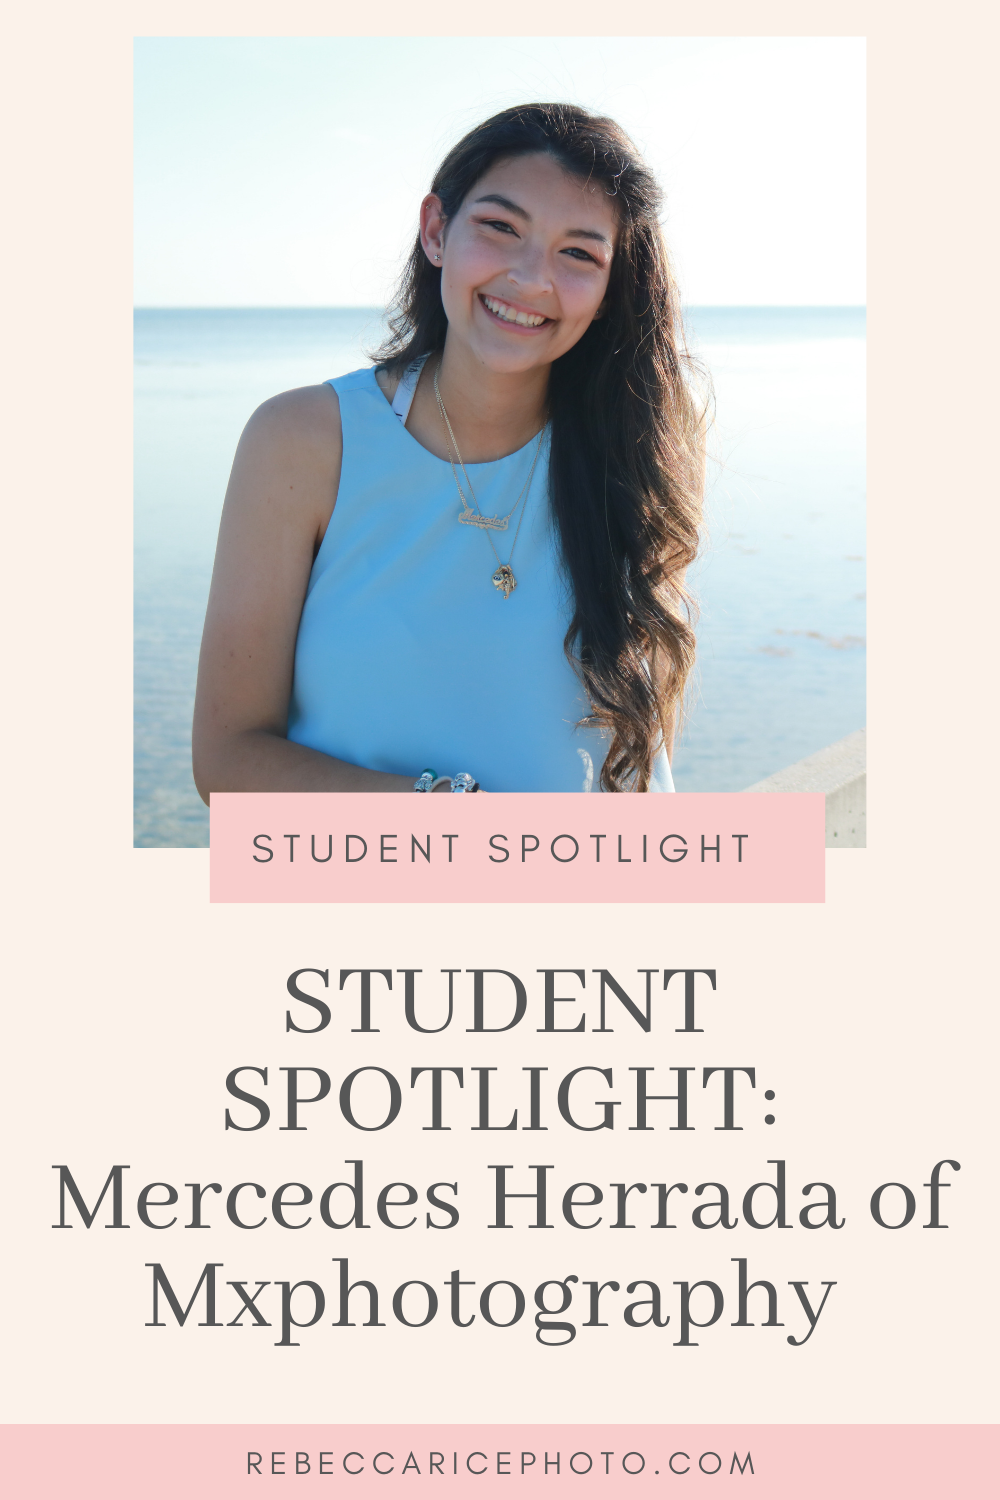 student spotlight with Rebecca Rice's students